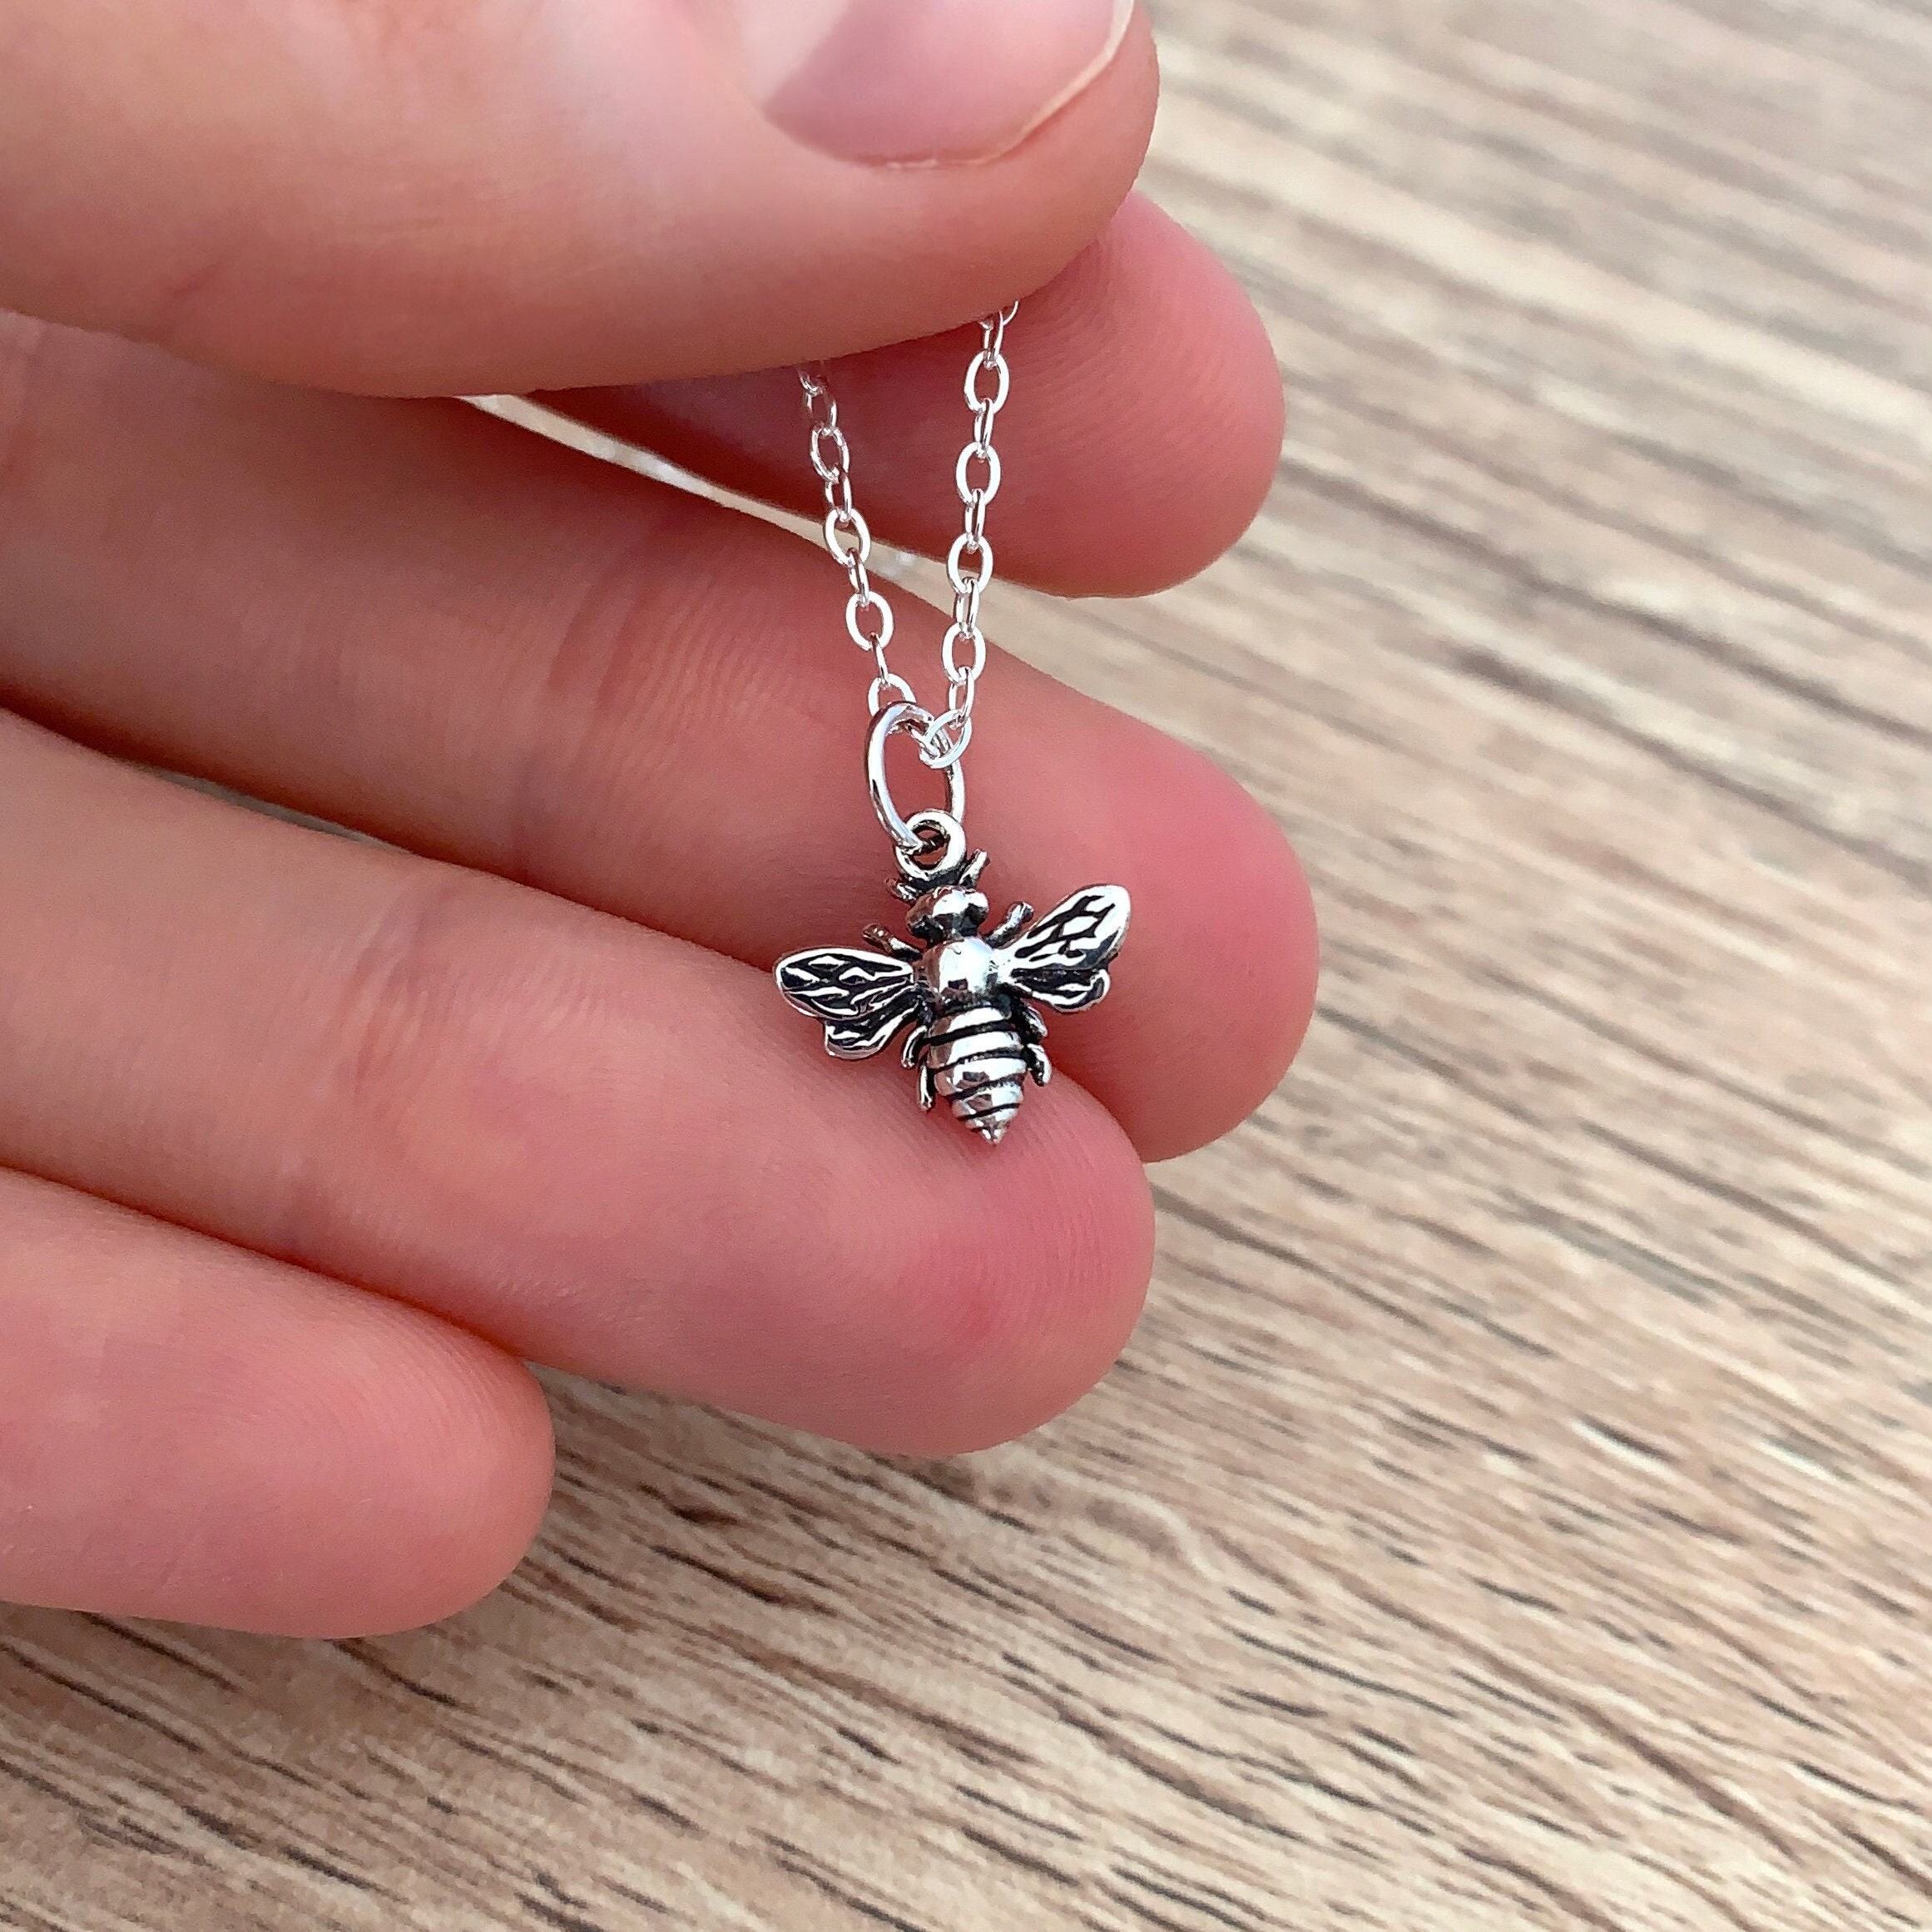 Pophylis Bee Necklace in Gold Silver 925 Sterling Tiny Honeybee Charm Necklace Graduation Gift